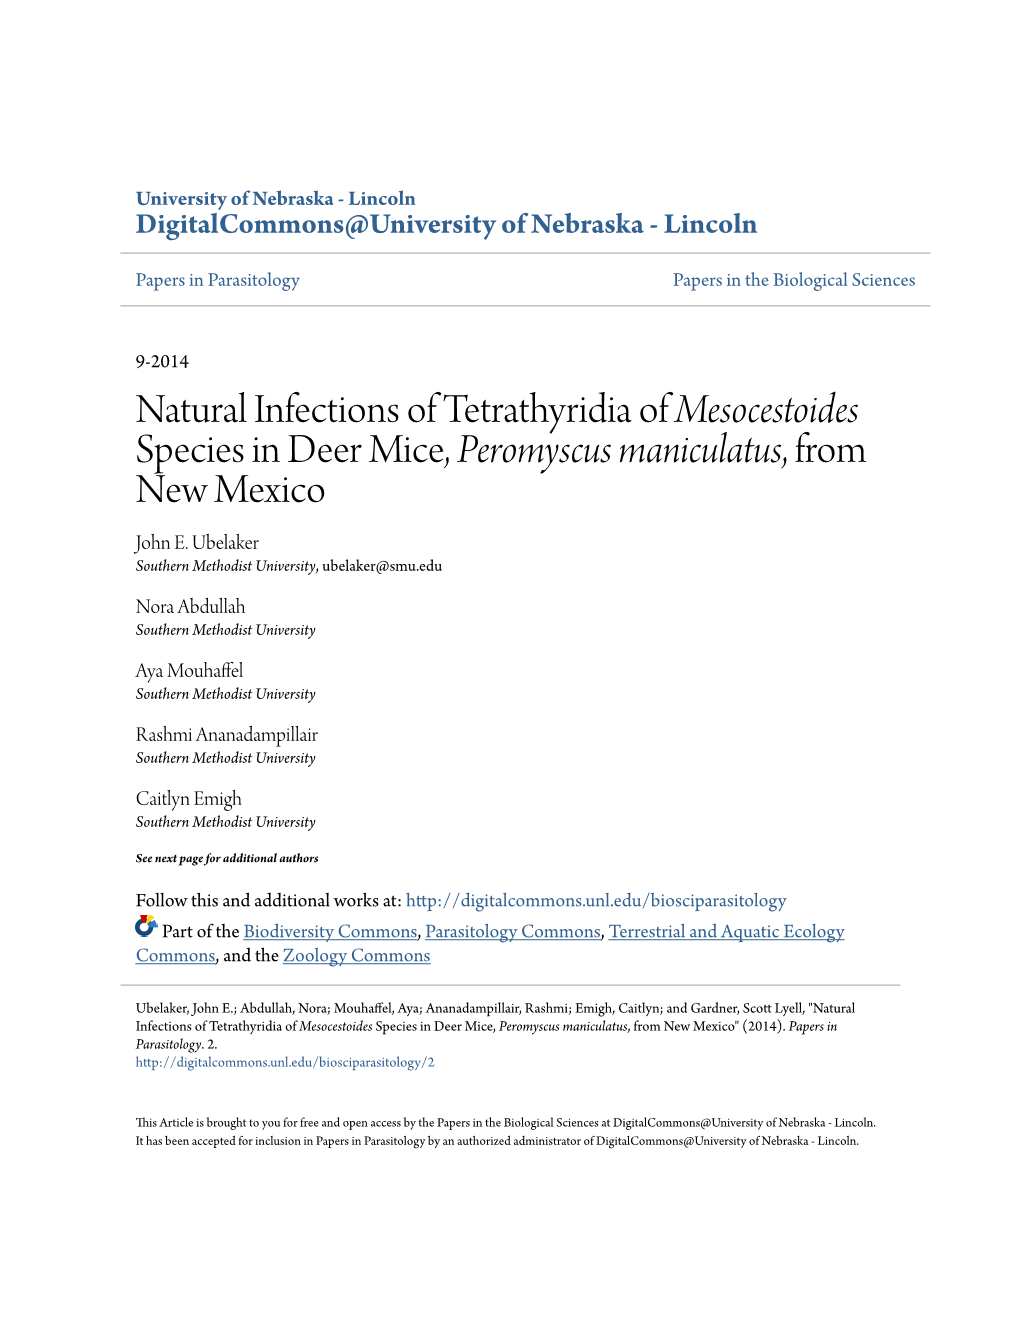 Natural Infections of Tetrathyridia of Mesocestoides Species in Deer Mice, Peromyscus Maniculatus, from New Mexico John E